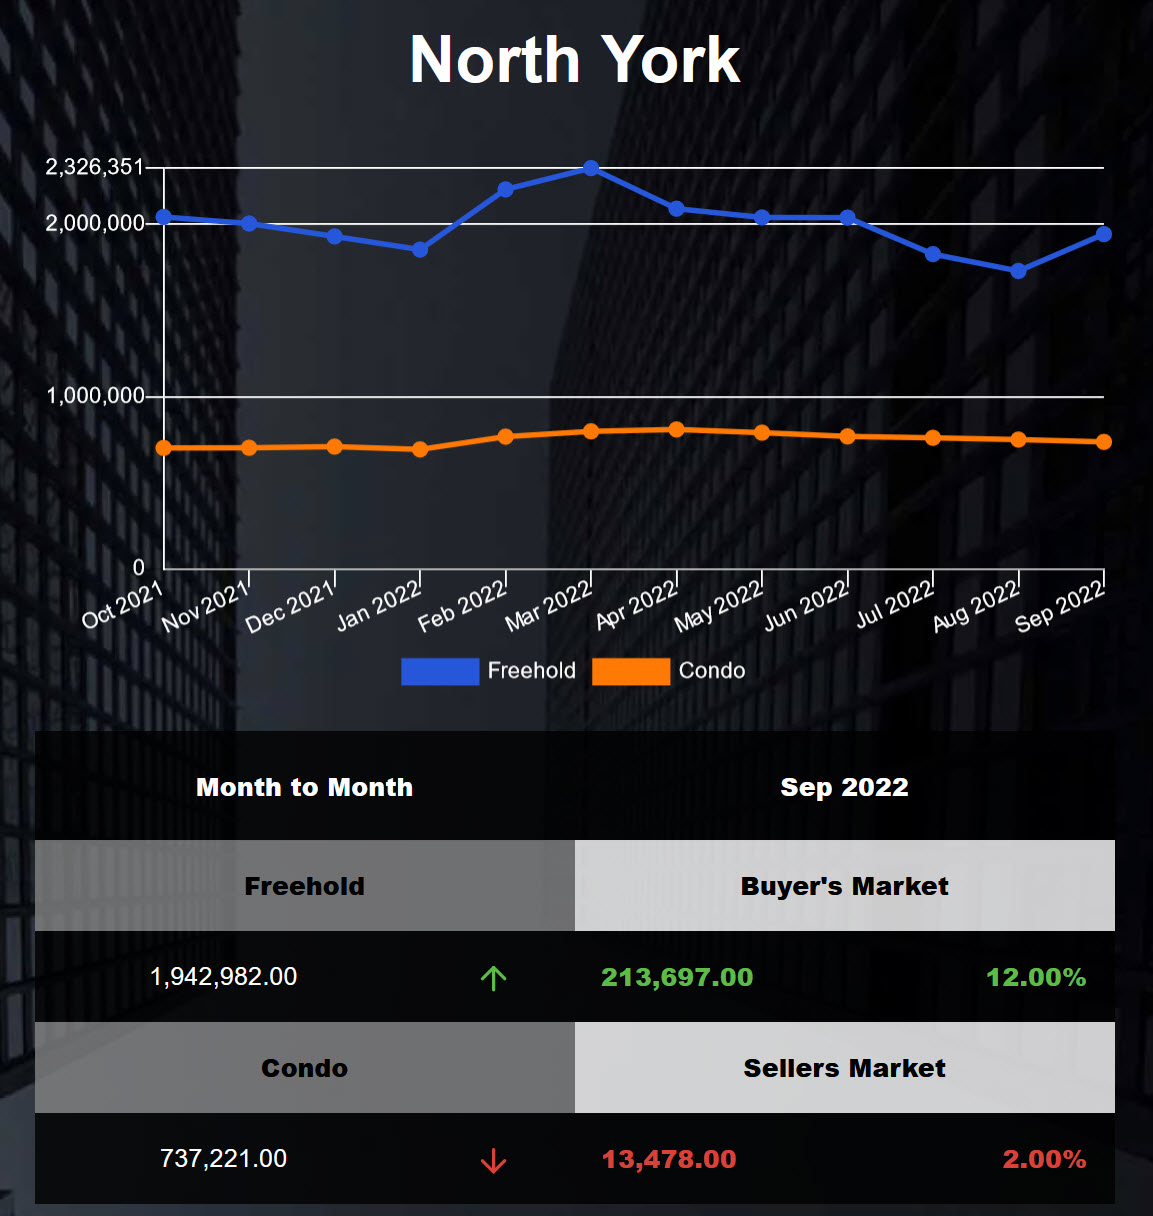 North York freehold average price increased in Aug 2022